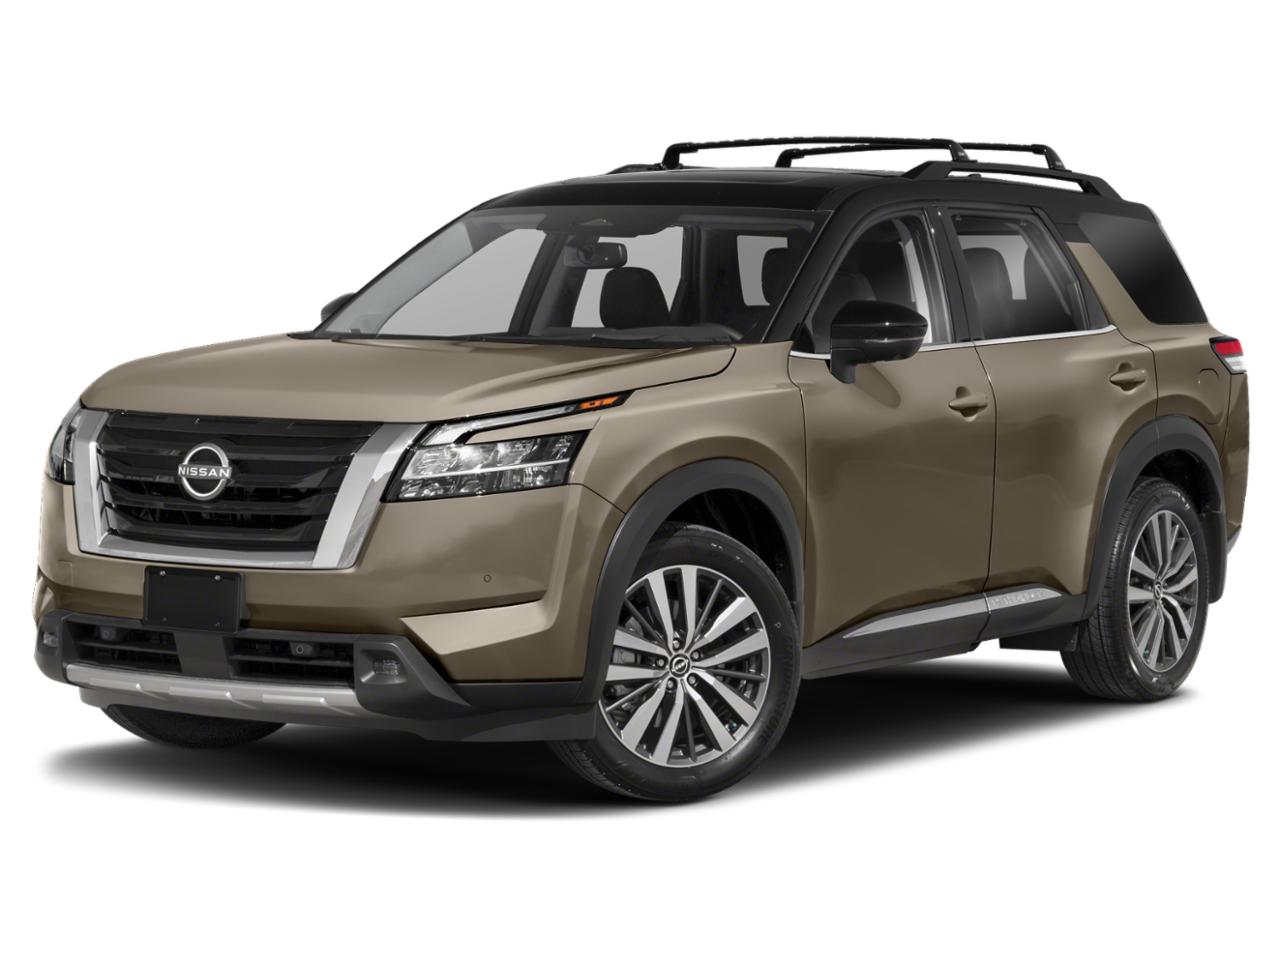 New 2024 Nissan Pathfinder available at Harry Green Nissan, in